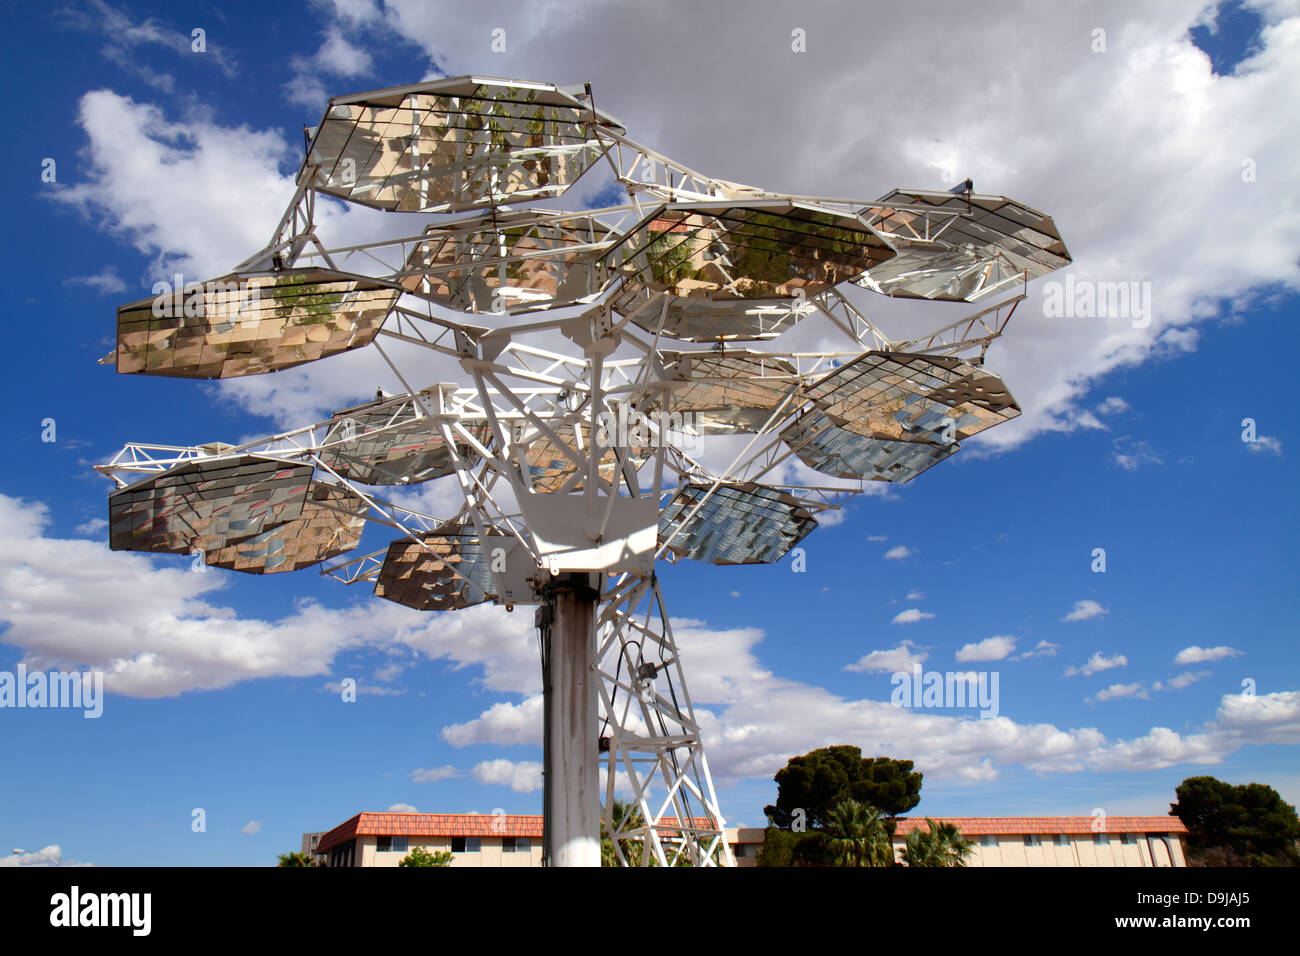 Las Vegas Nevada,UNLV,University of Nevada,Center for Energy Research,Solar Technology testing,Concentrated fotovoltaic (CPV) system,NV130401051 Foto Stock